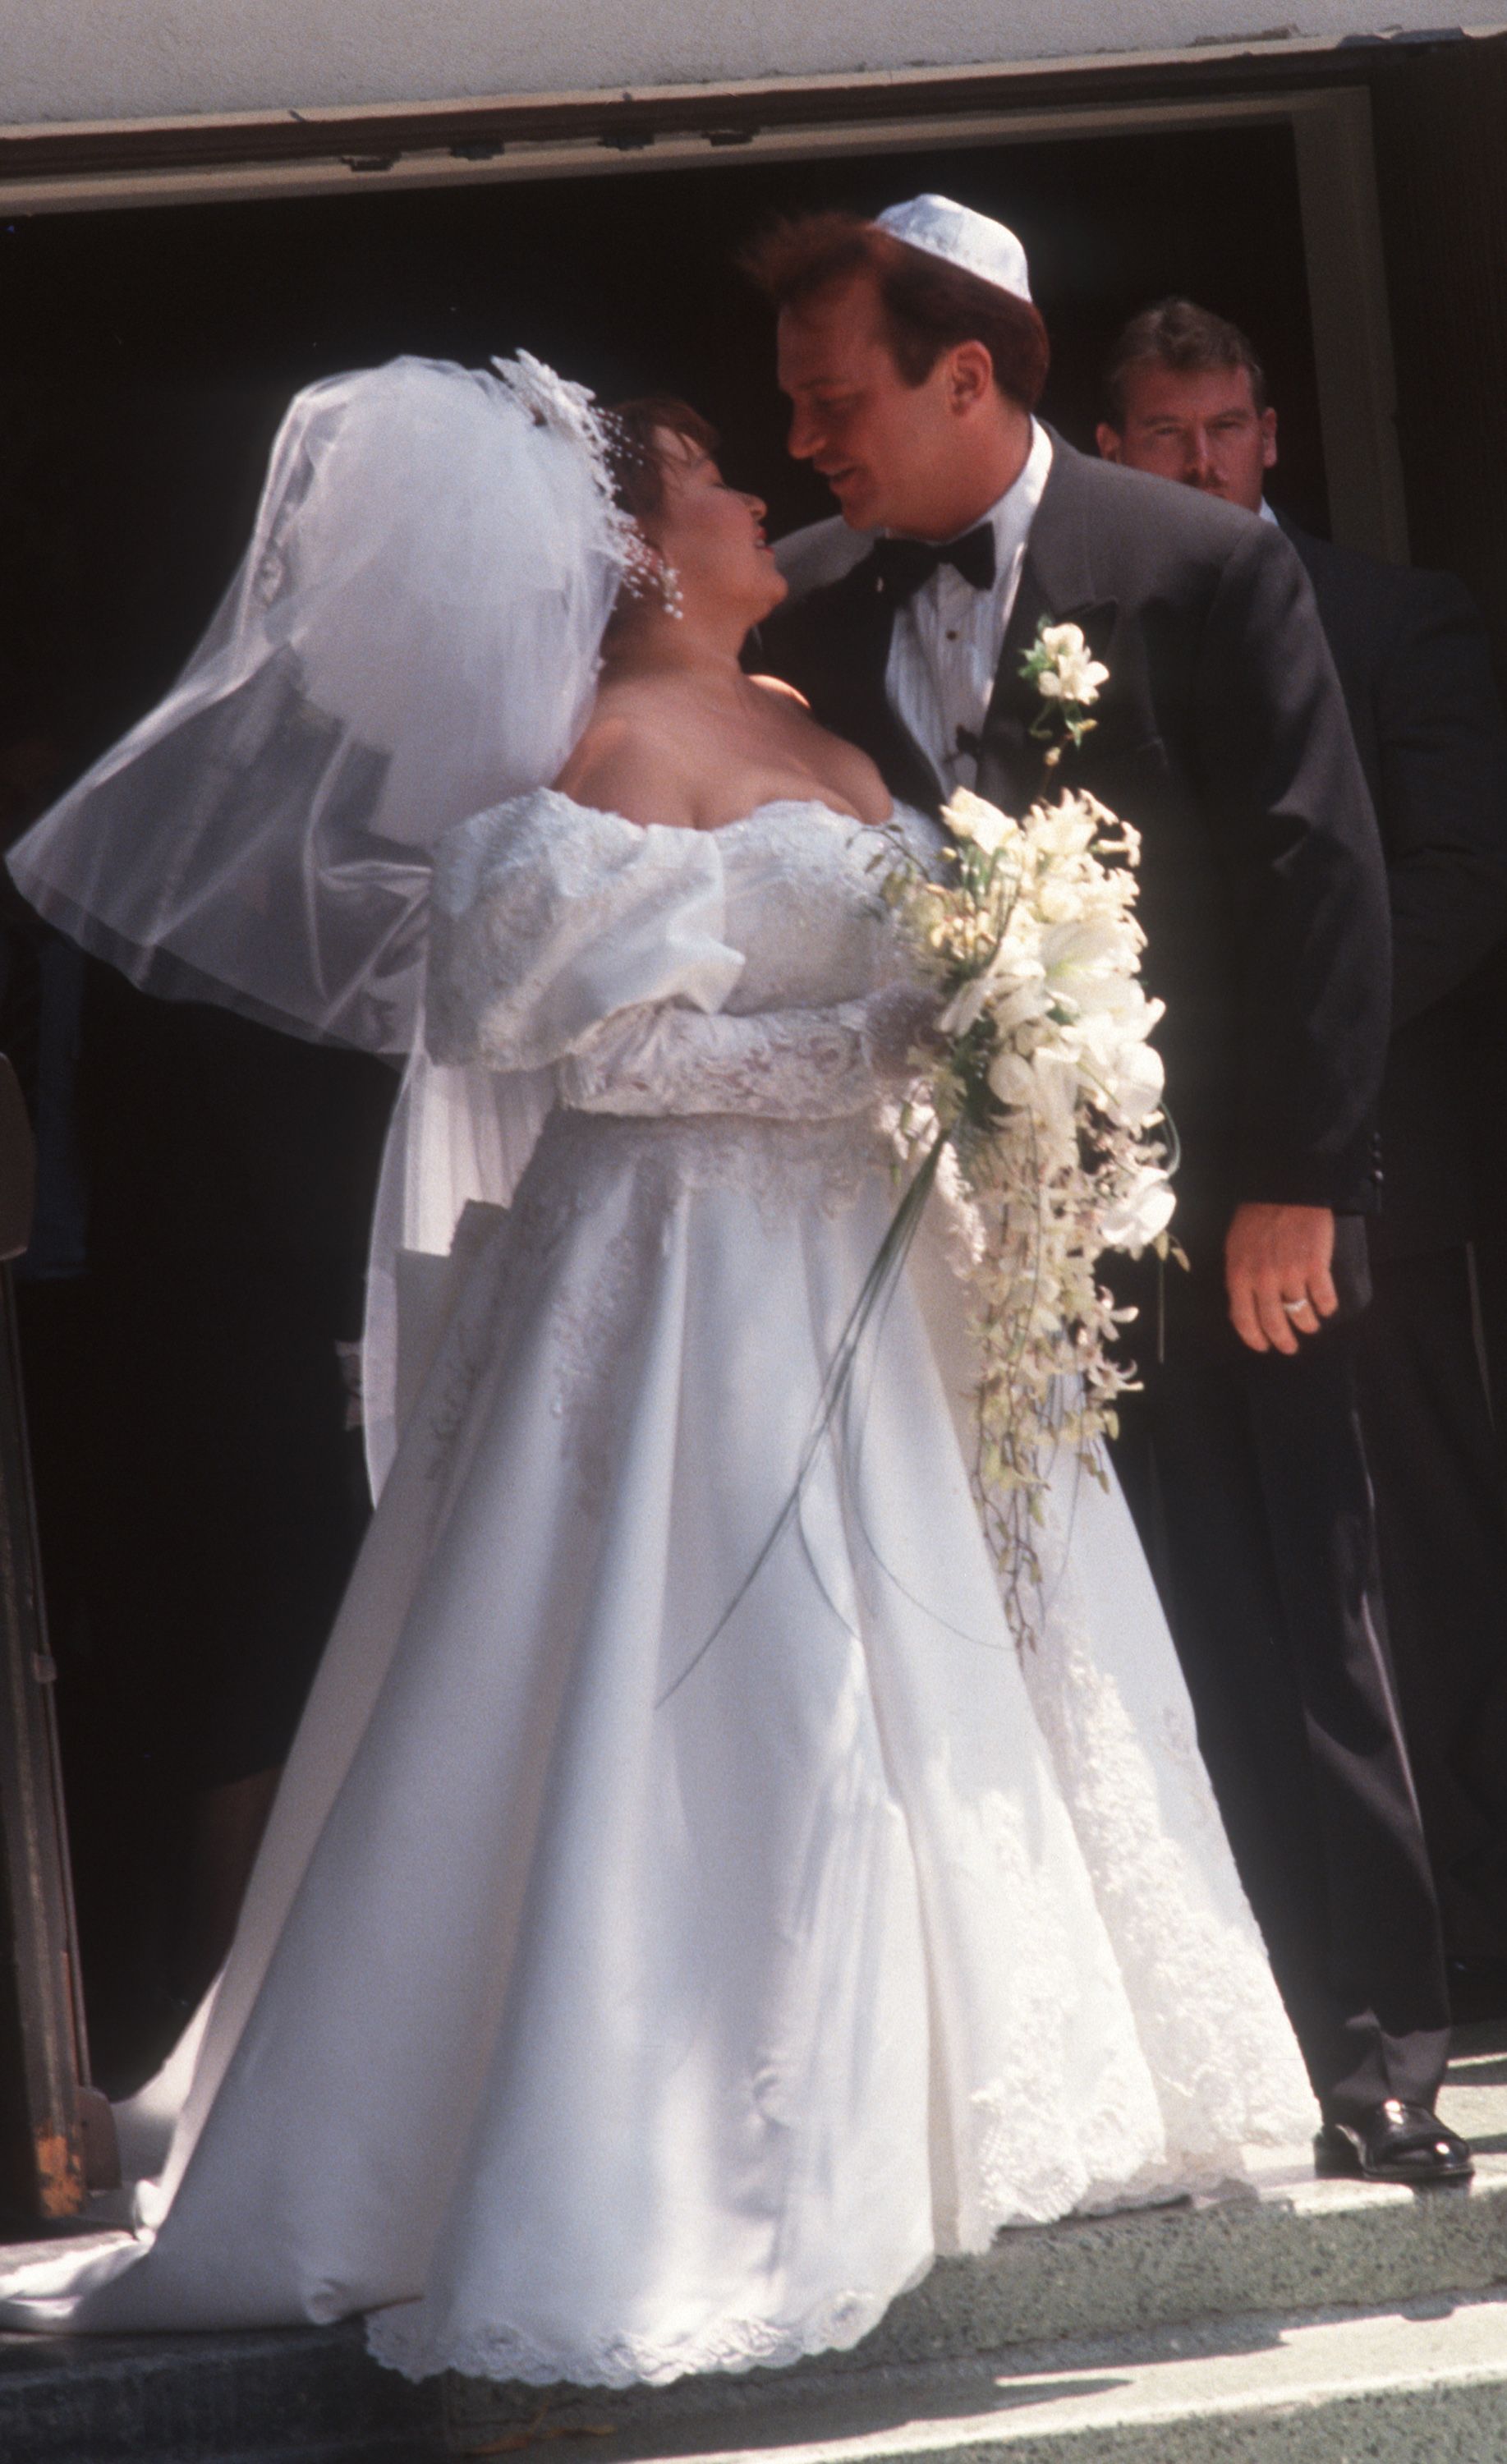 Roseanne Barr and Tom Arnold during their wedding in an image uploaded on June 23, 1991, at University's Synagogue in Los Angeles, California | Photo: Ron Galella, Ltd./Ron Galella Collection/Getty Images